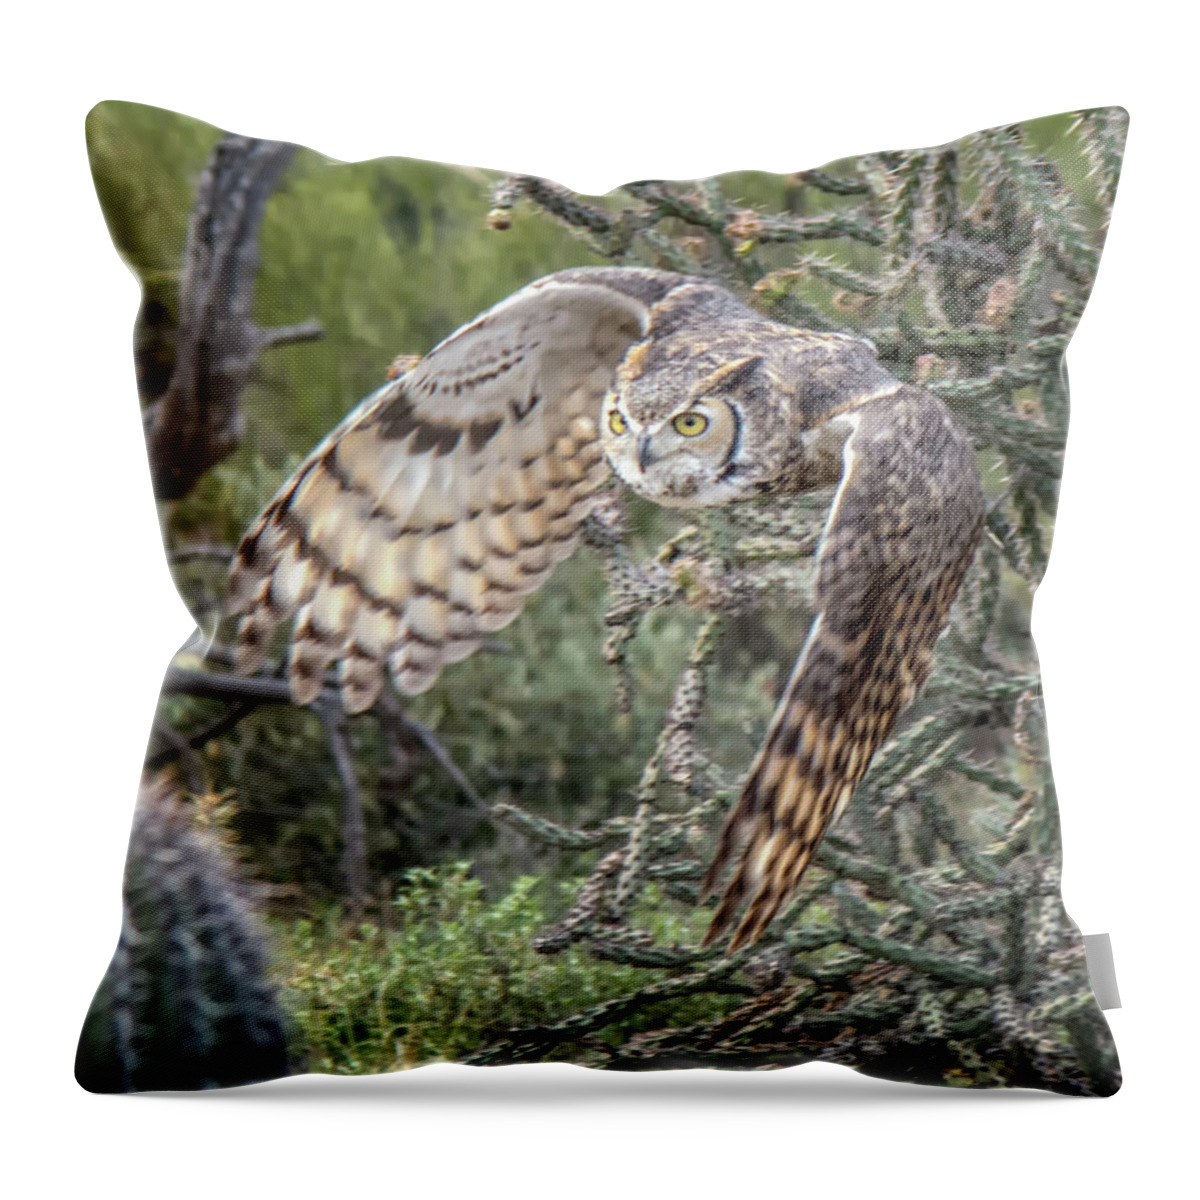 Great Throw Pillow featuring the photograph Great Horned Owl #1 by Tam Ryan